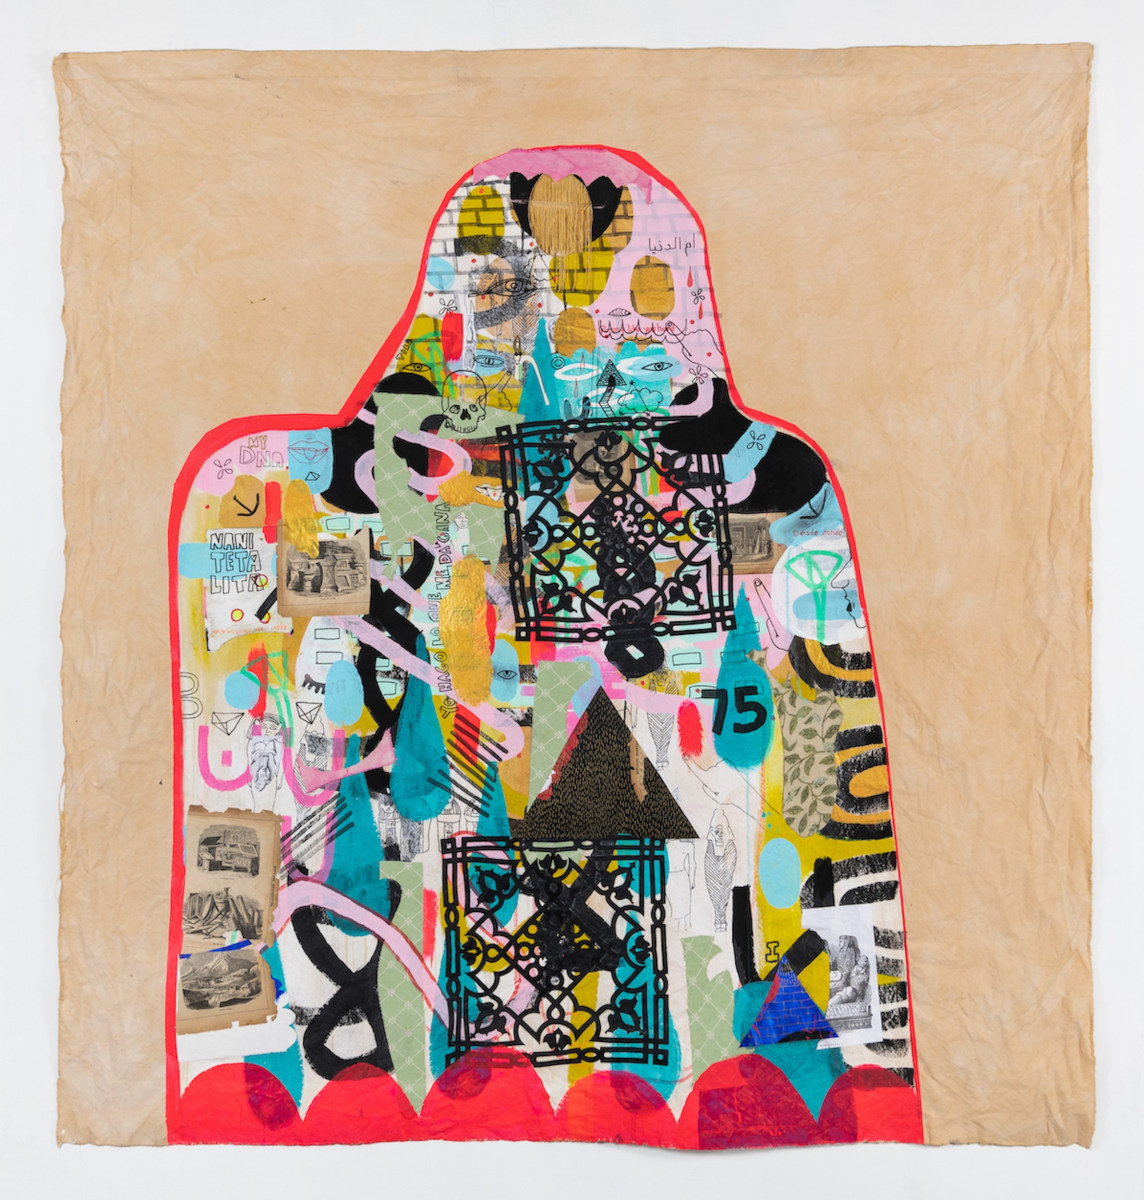 Jackie Milad, Stolen, 2021, Mixed media on hand dyed canvas collage, 69 x 64.5 in.